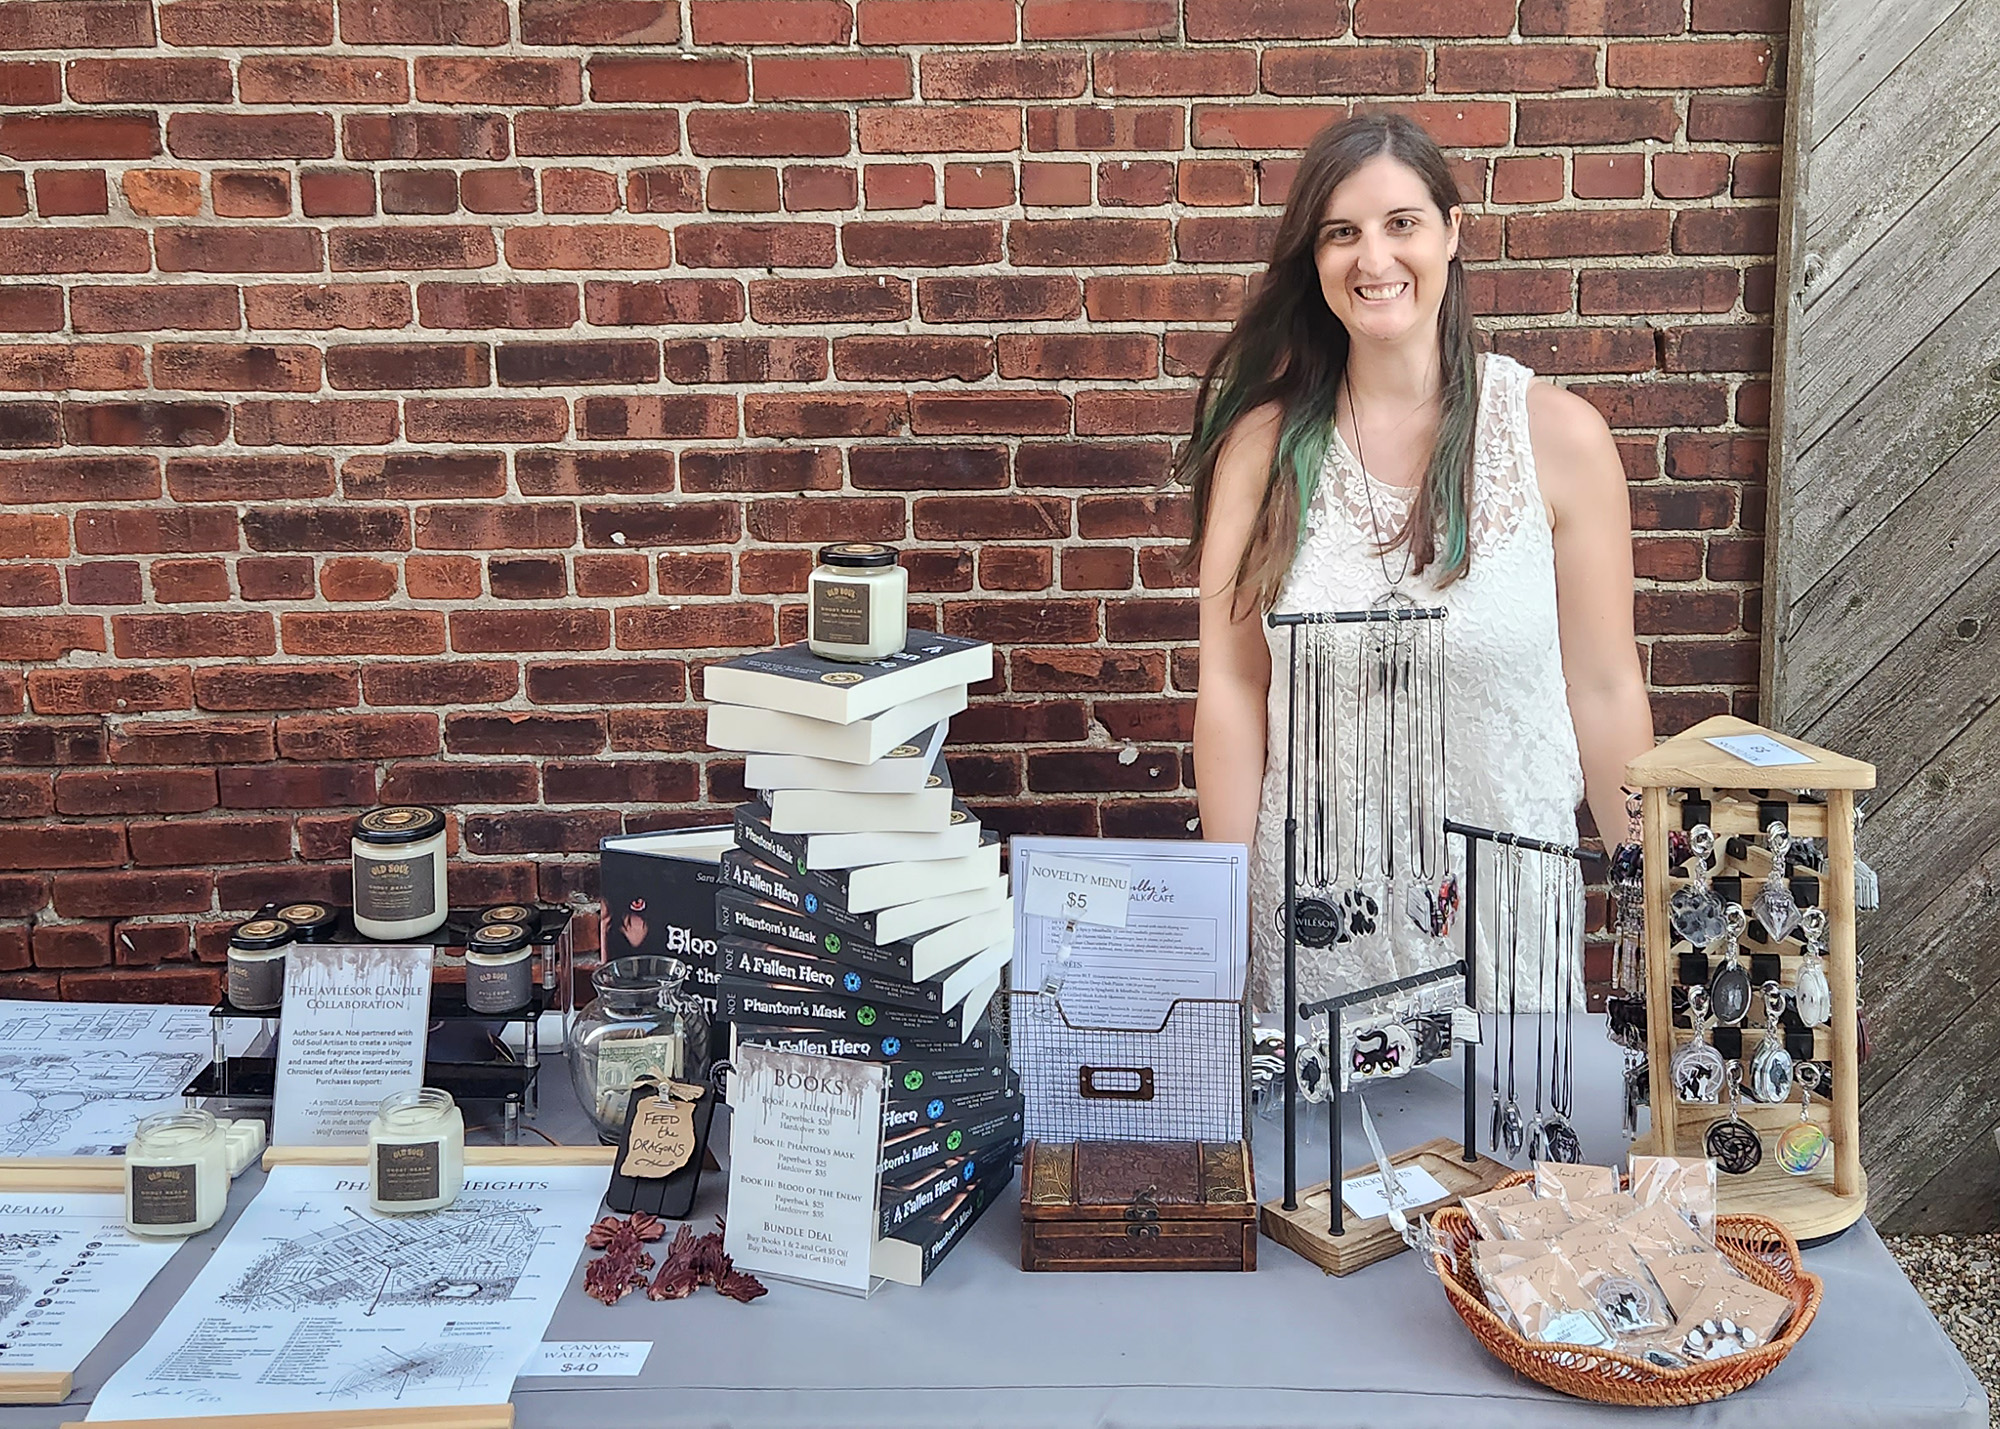 Author and artist Sara A. Noe as a vendor behind her booth